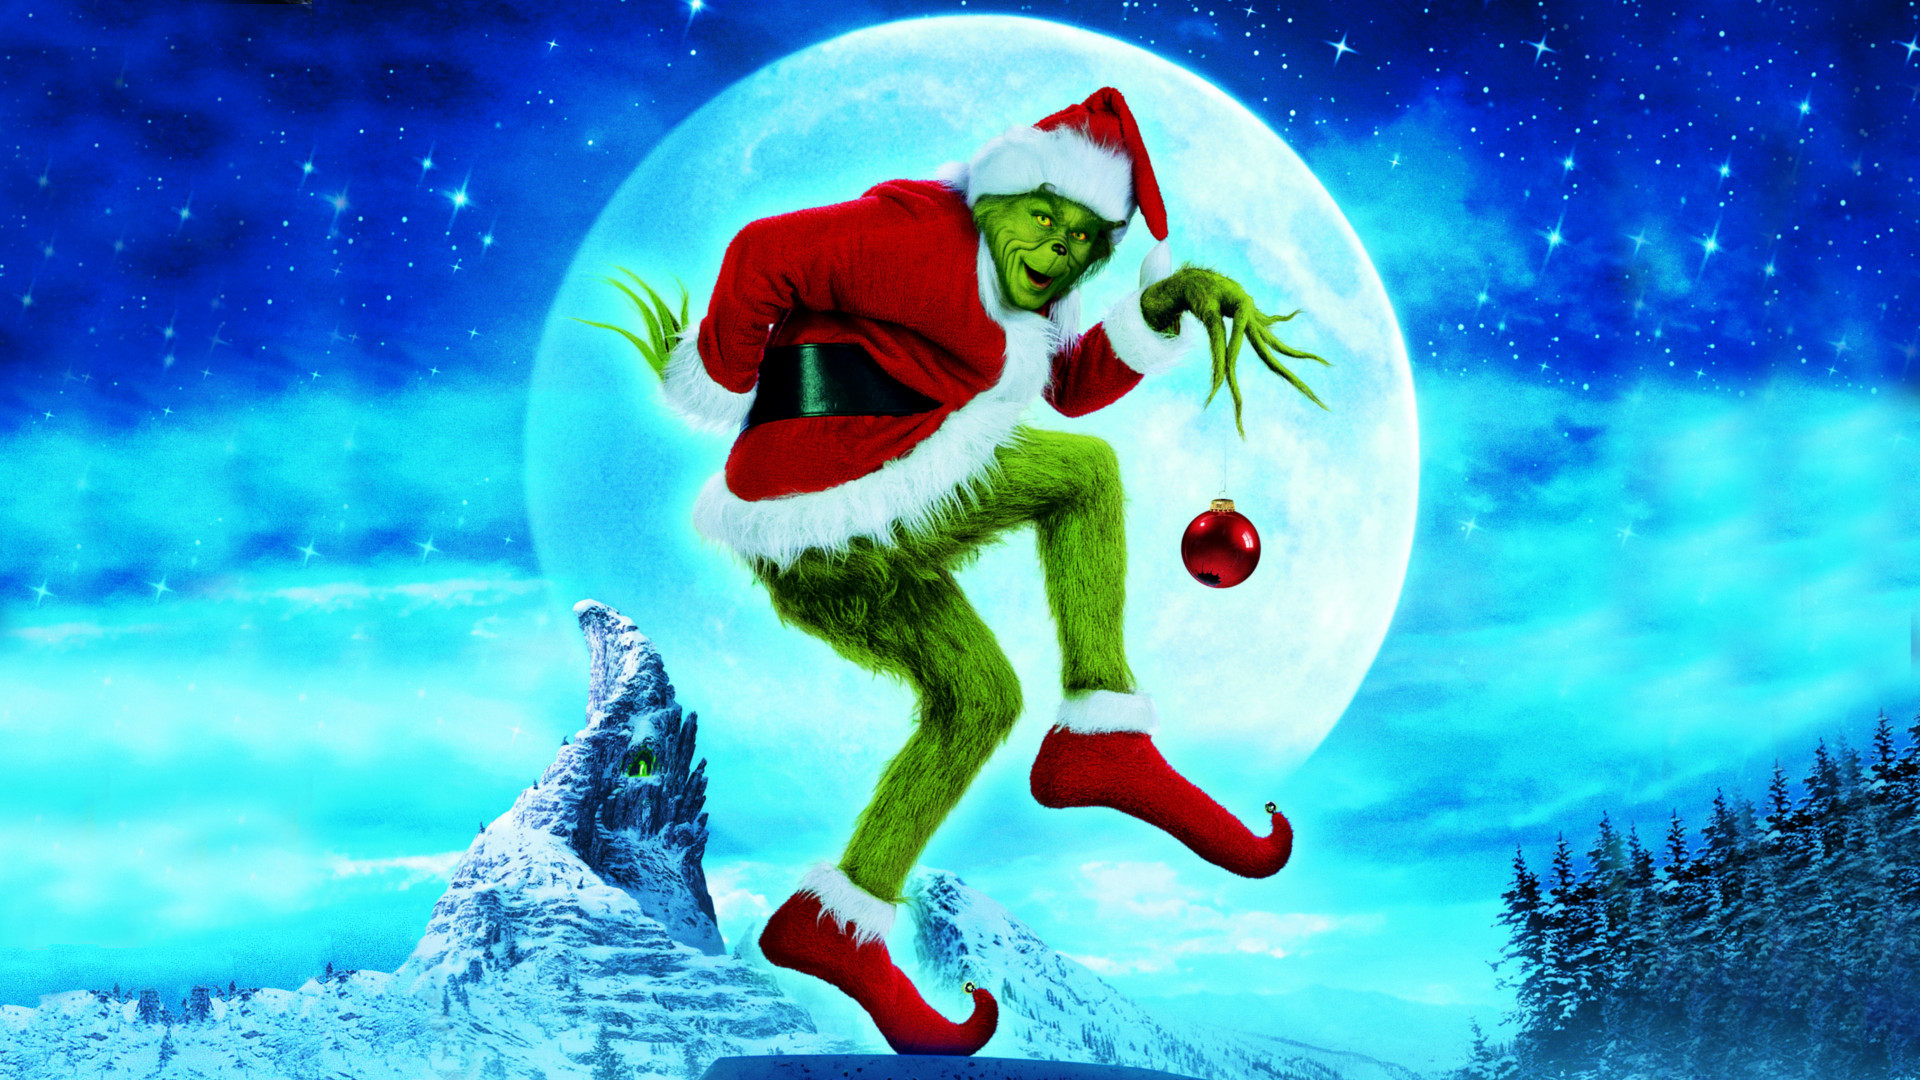 2 How The Grinch Stole Christmas Hd Wallpapers - Grinch Desktop Background - HD Wallpaper 